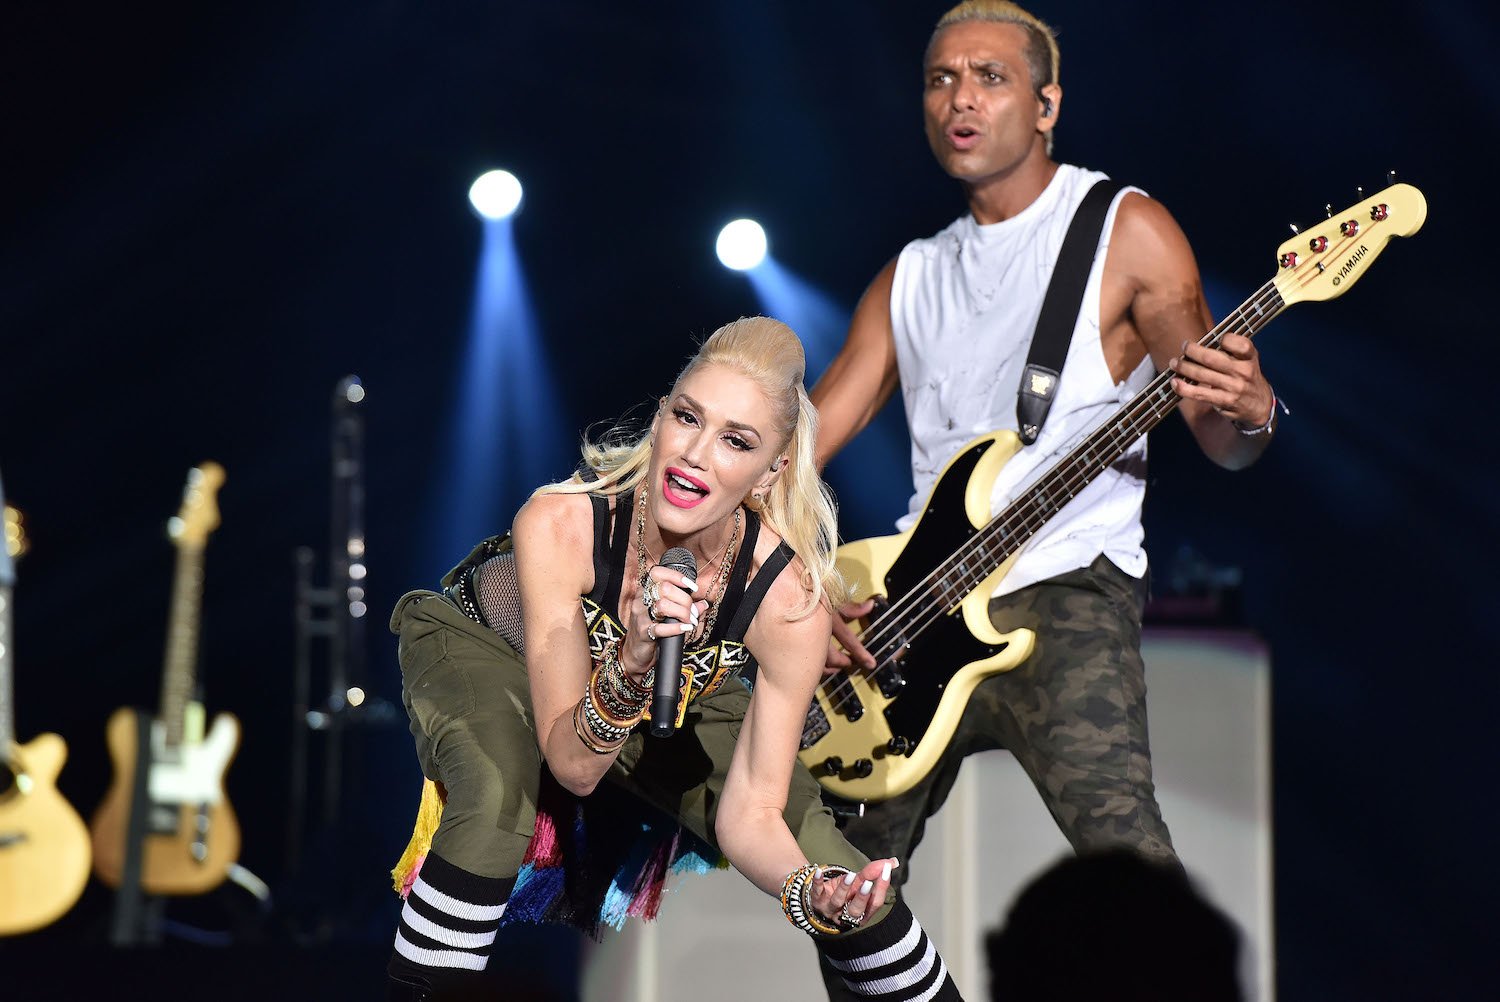 Gwen Stefani and Tony Kanal of No Doubt perform during the 2015 KAABOO Del Mar at the Del Mar Fairgrounds